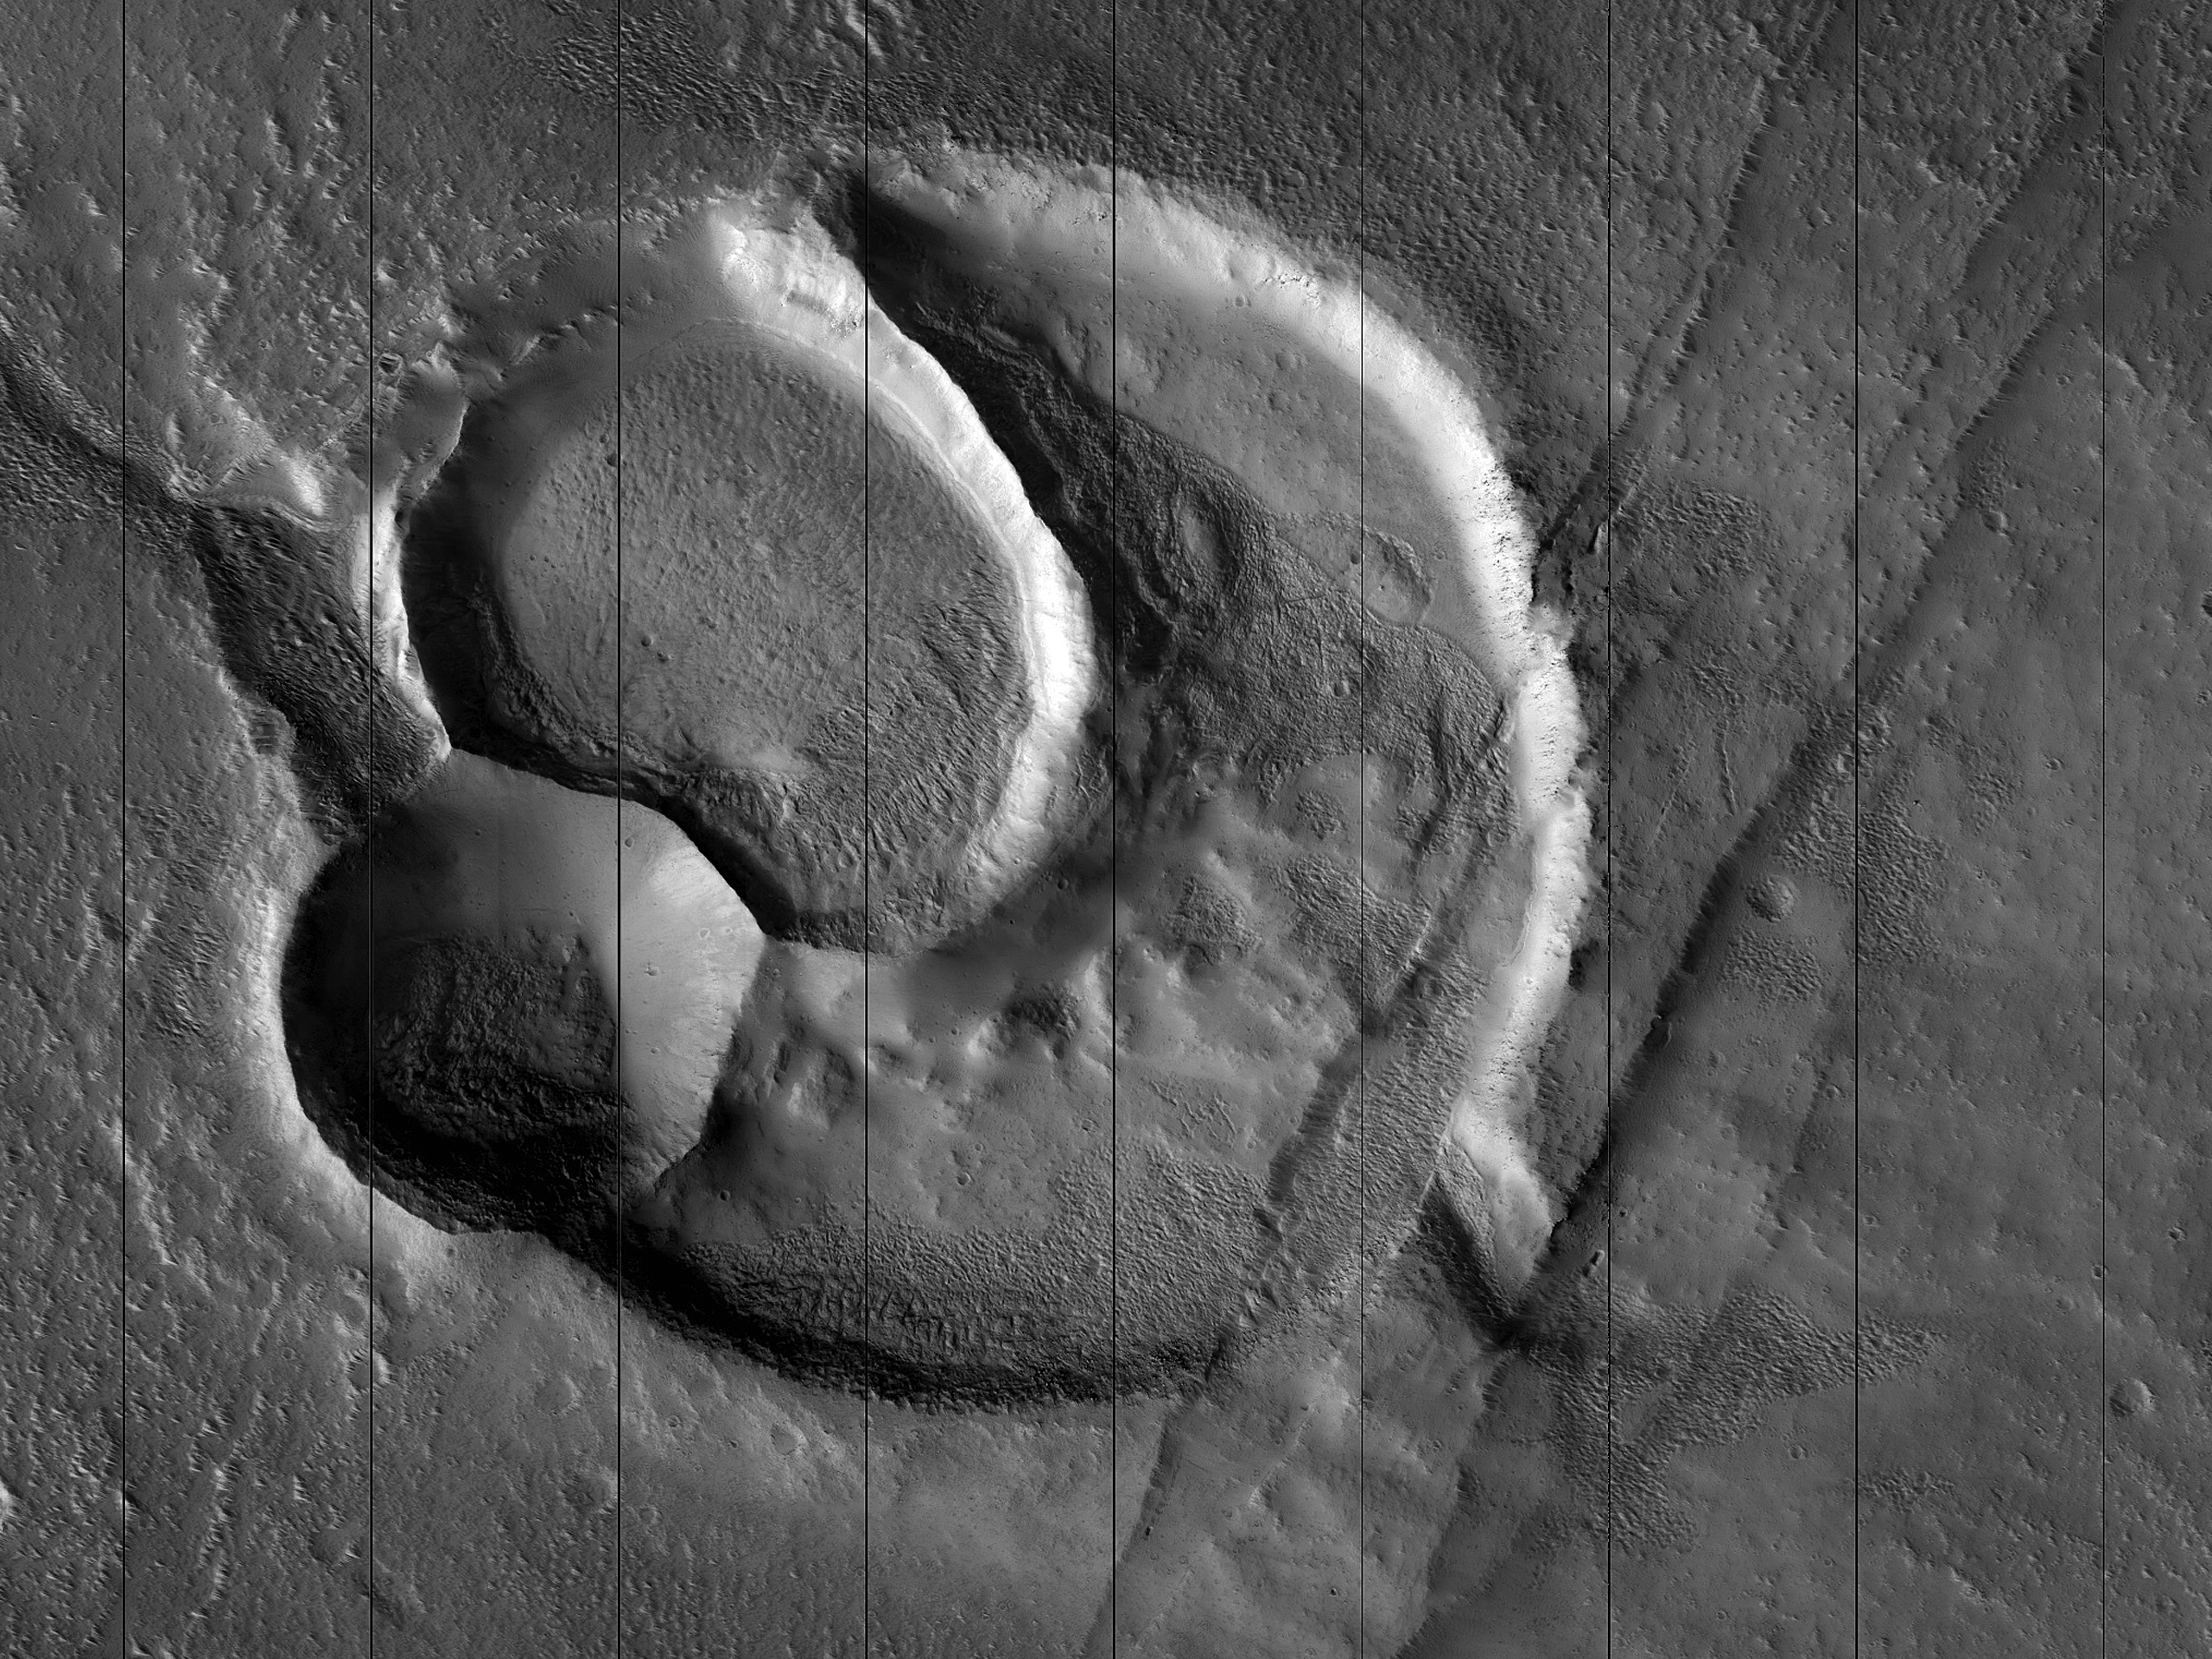 Two Impact Craters within One